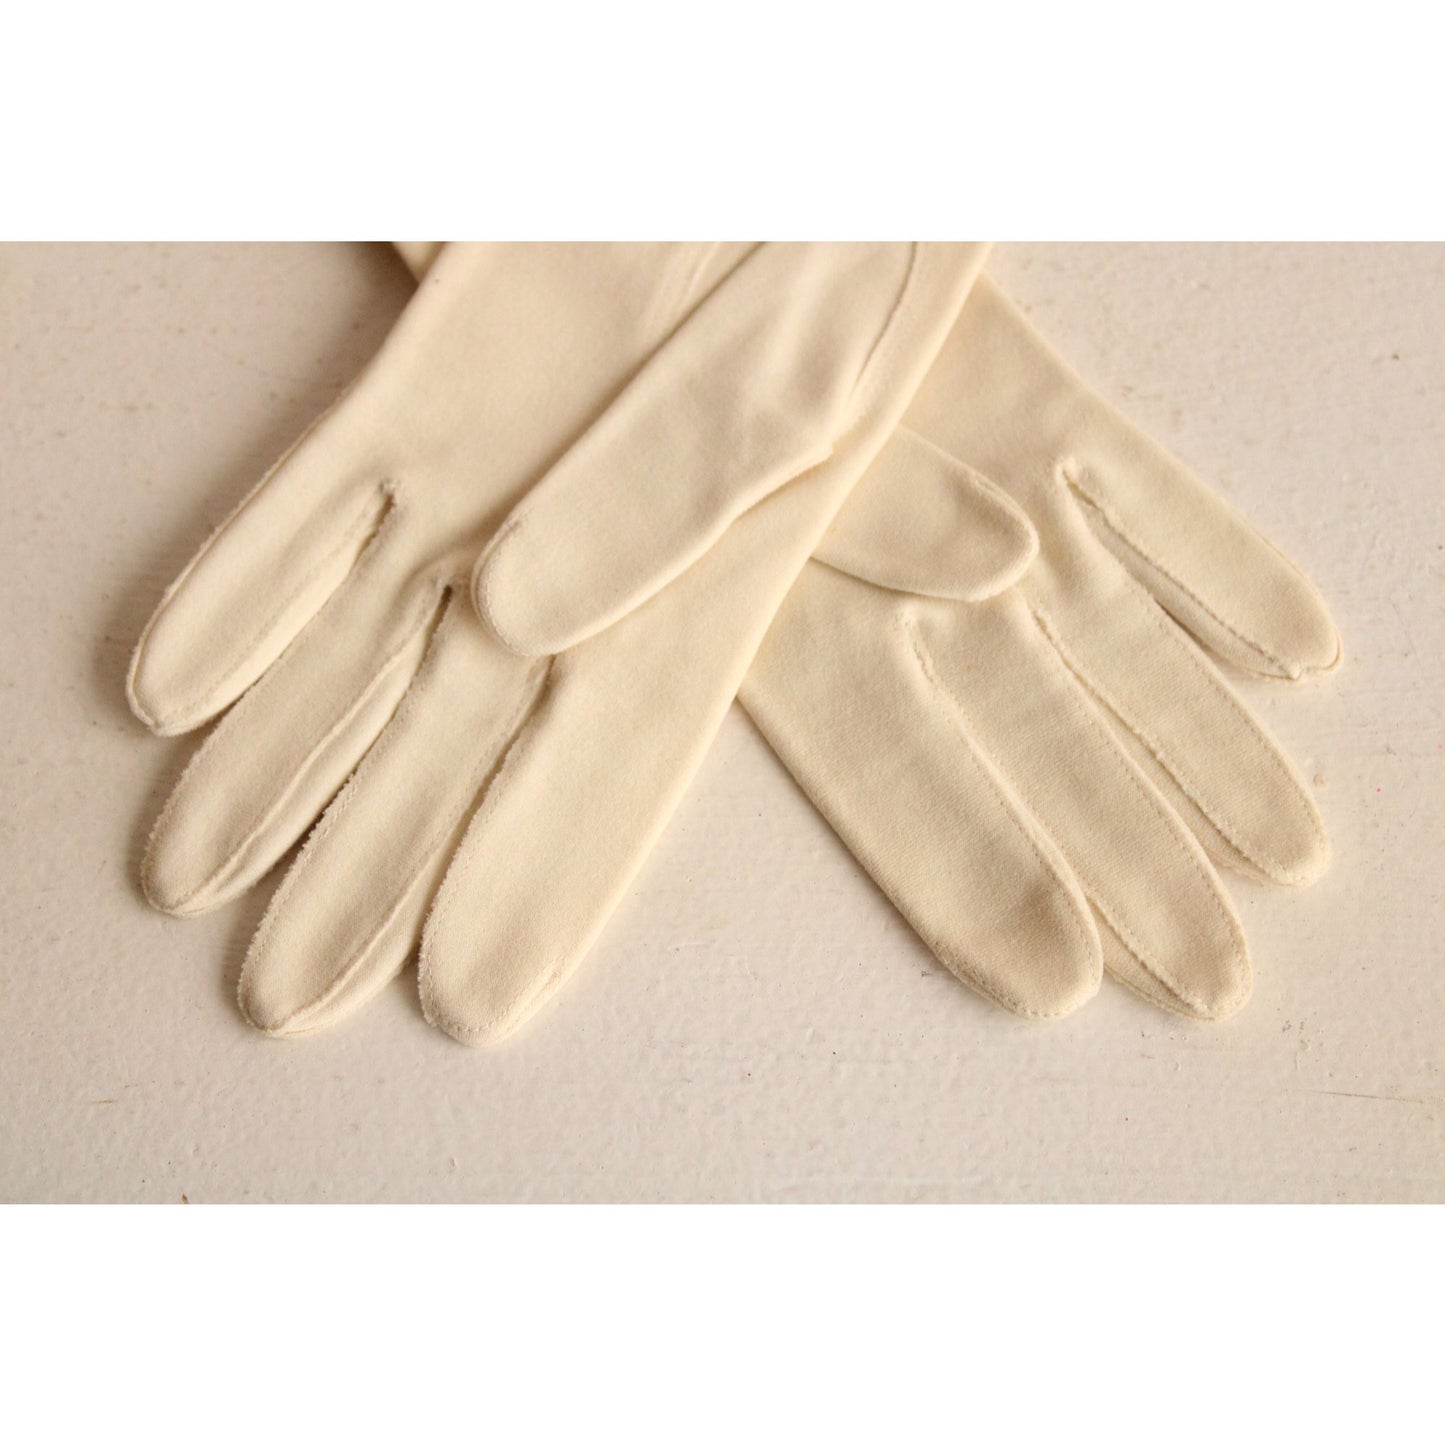 Vintage 1950s 1960s Aris Gloves Size 6 1/2 in Embroidered Ivory Cotton